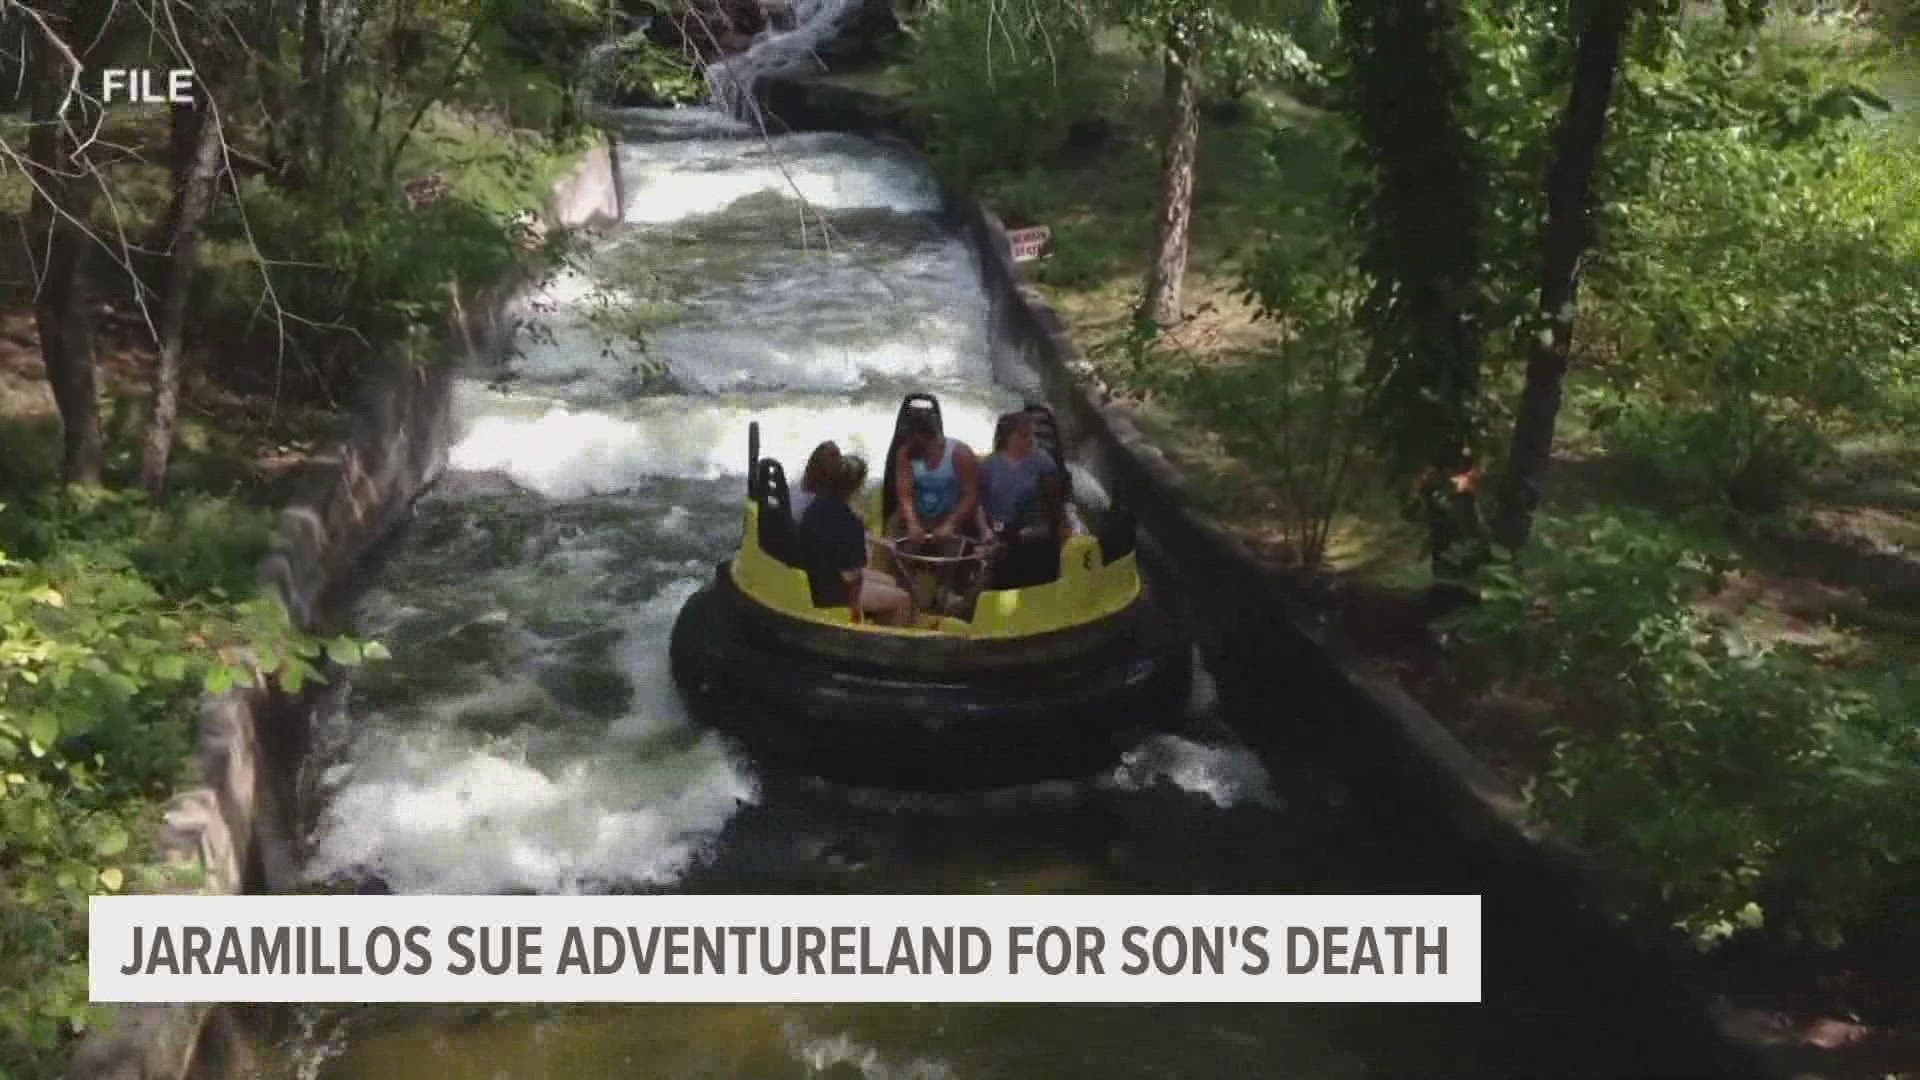 The Jaramillo family, who lost 11-year-old Michael after he was trapped underwater on the Raging River, is suing the amusement park for wrongful death.